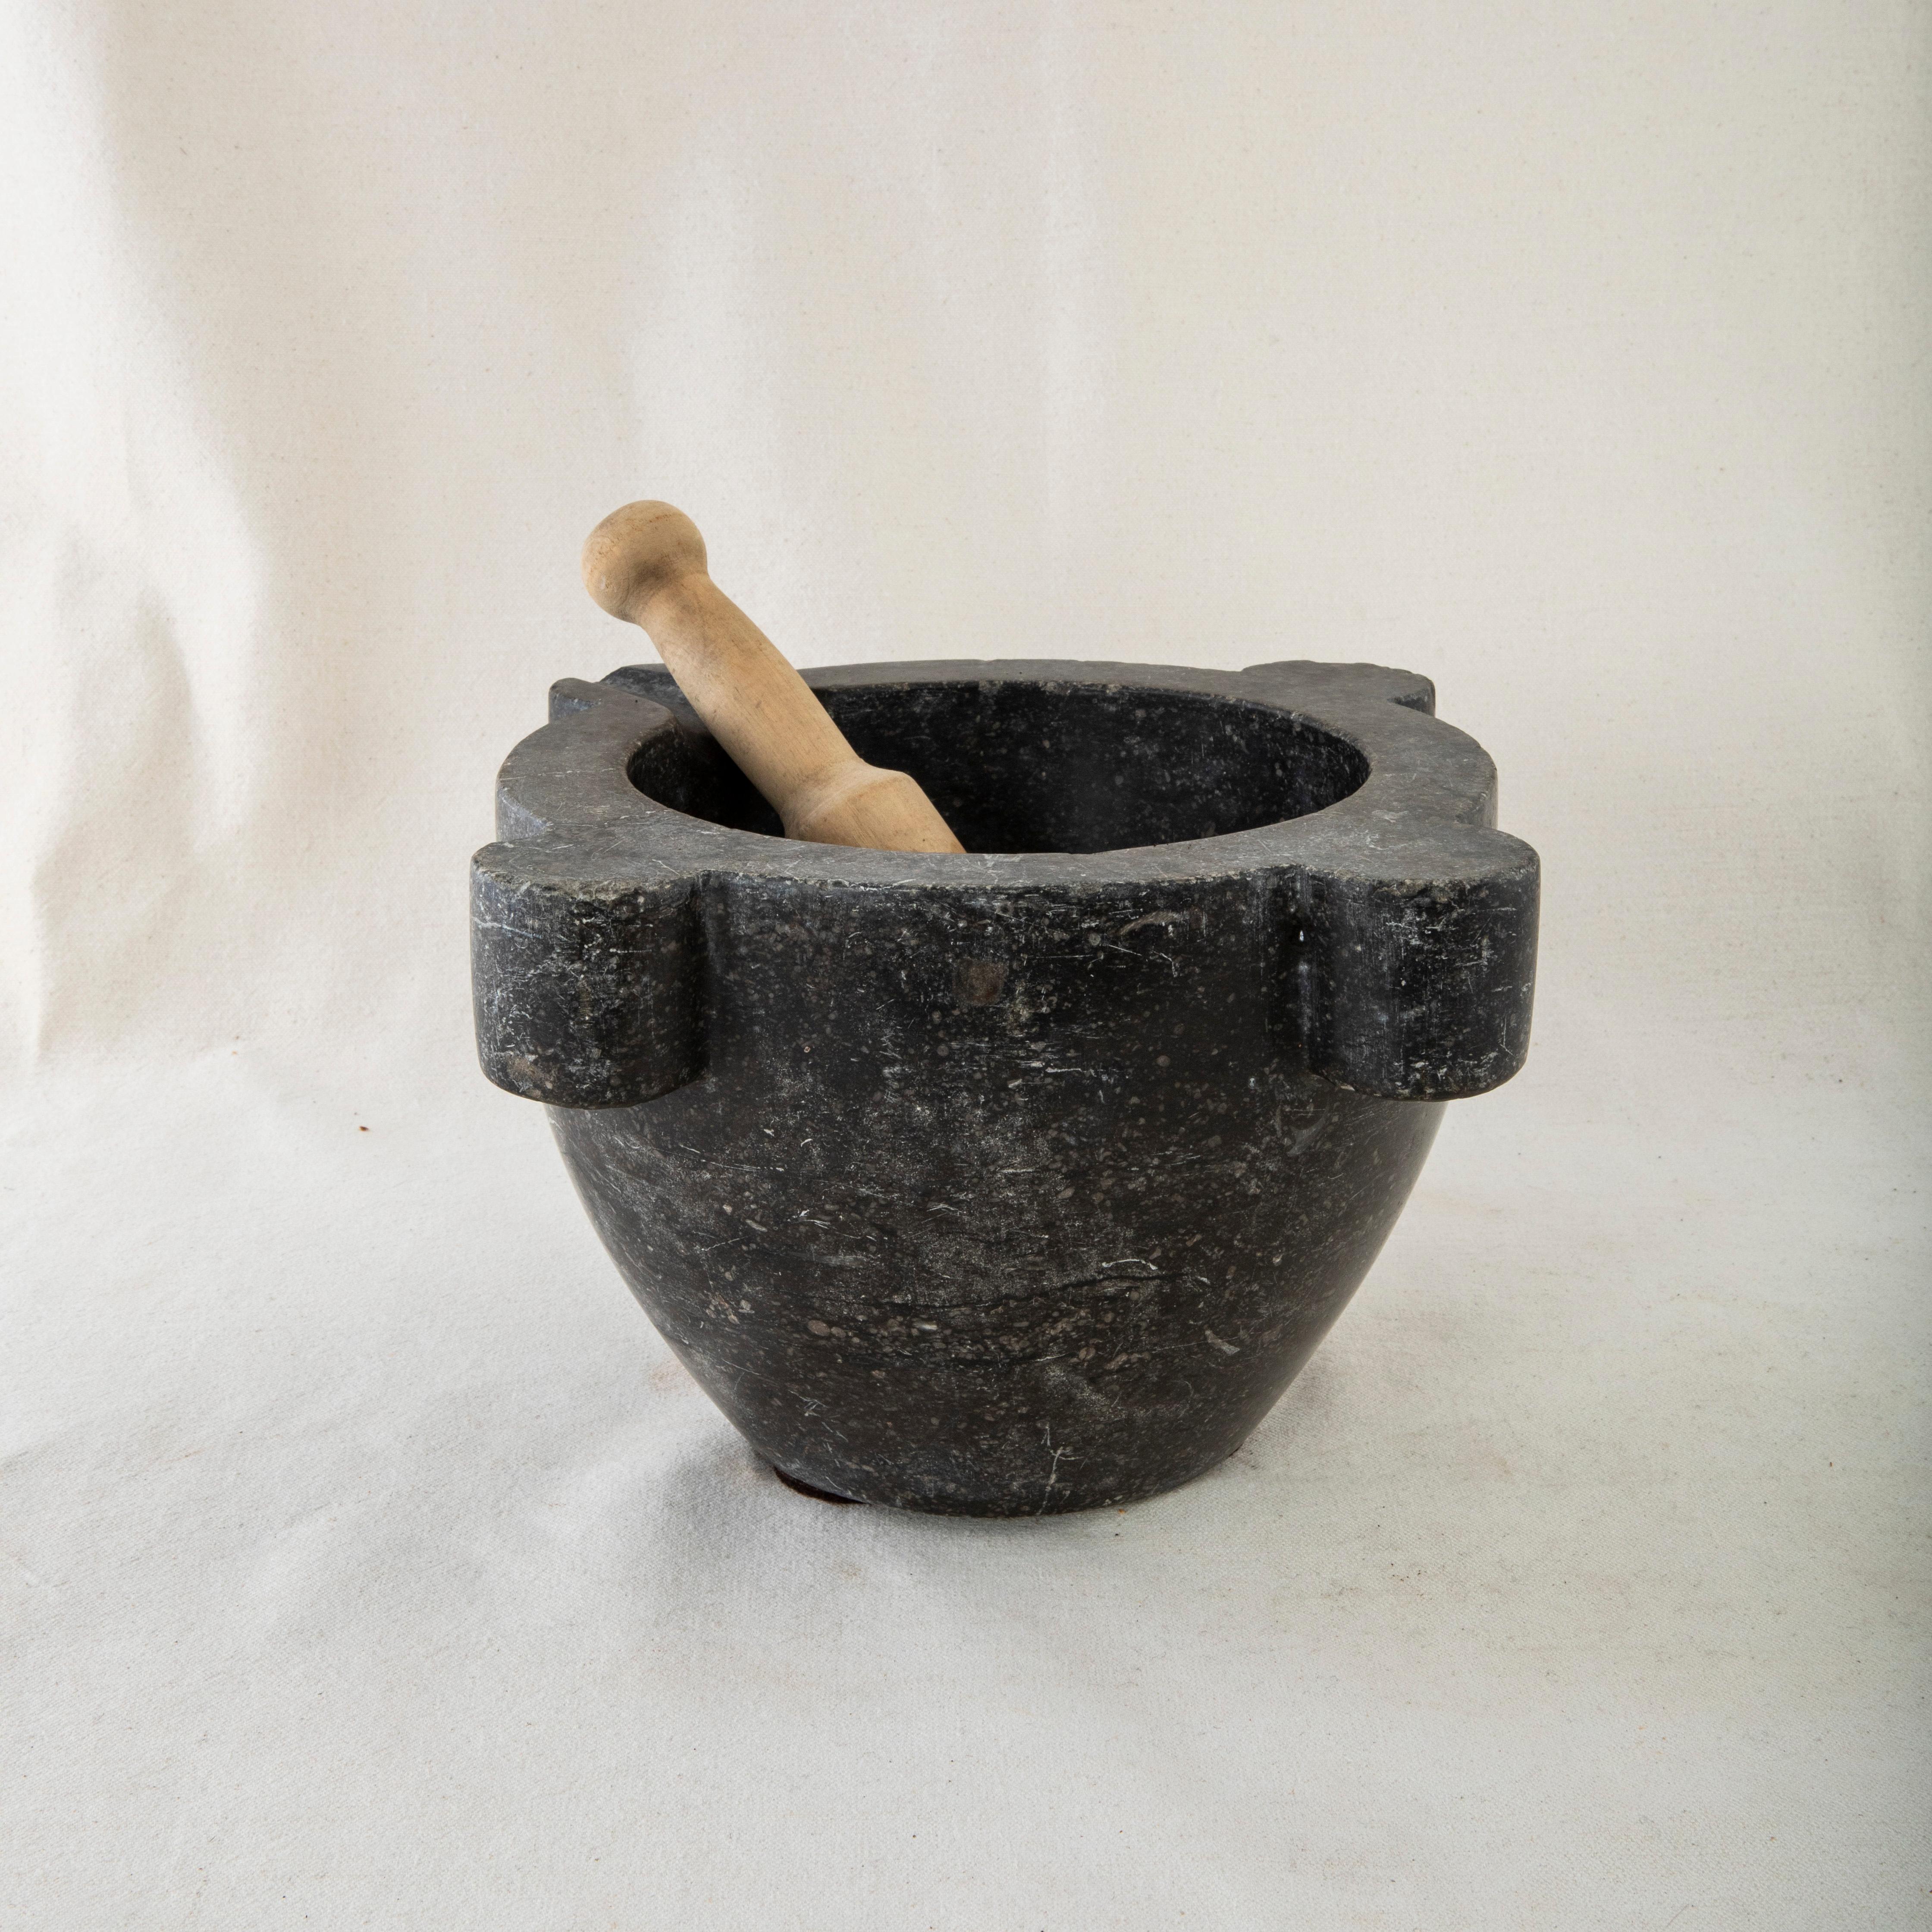 This large black marble mortar from the nineteenth century is made from a single block of marble and features its original turned pestle made of wood. Once used by a pharmacist to grind herbs for medicinal purposes, it can now serve as a planter,